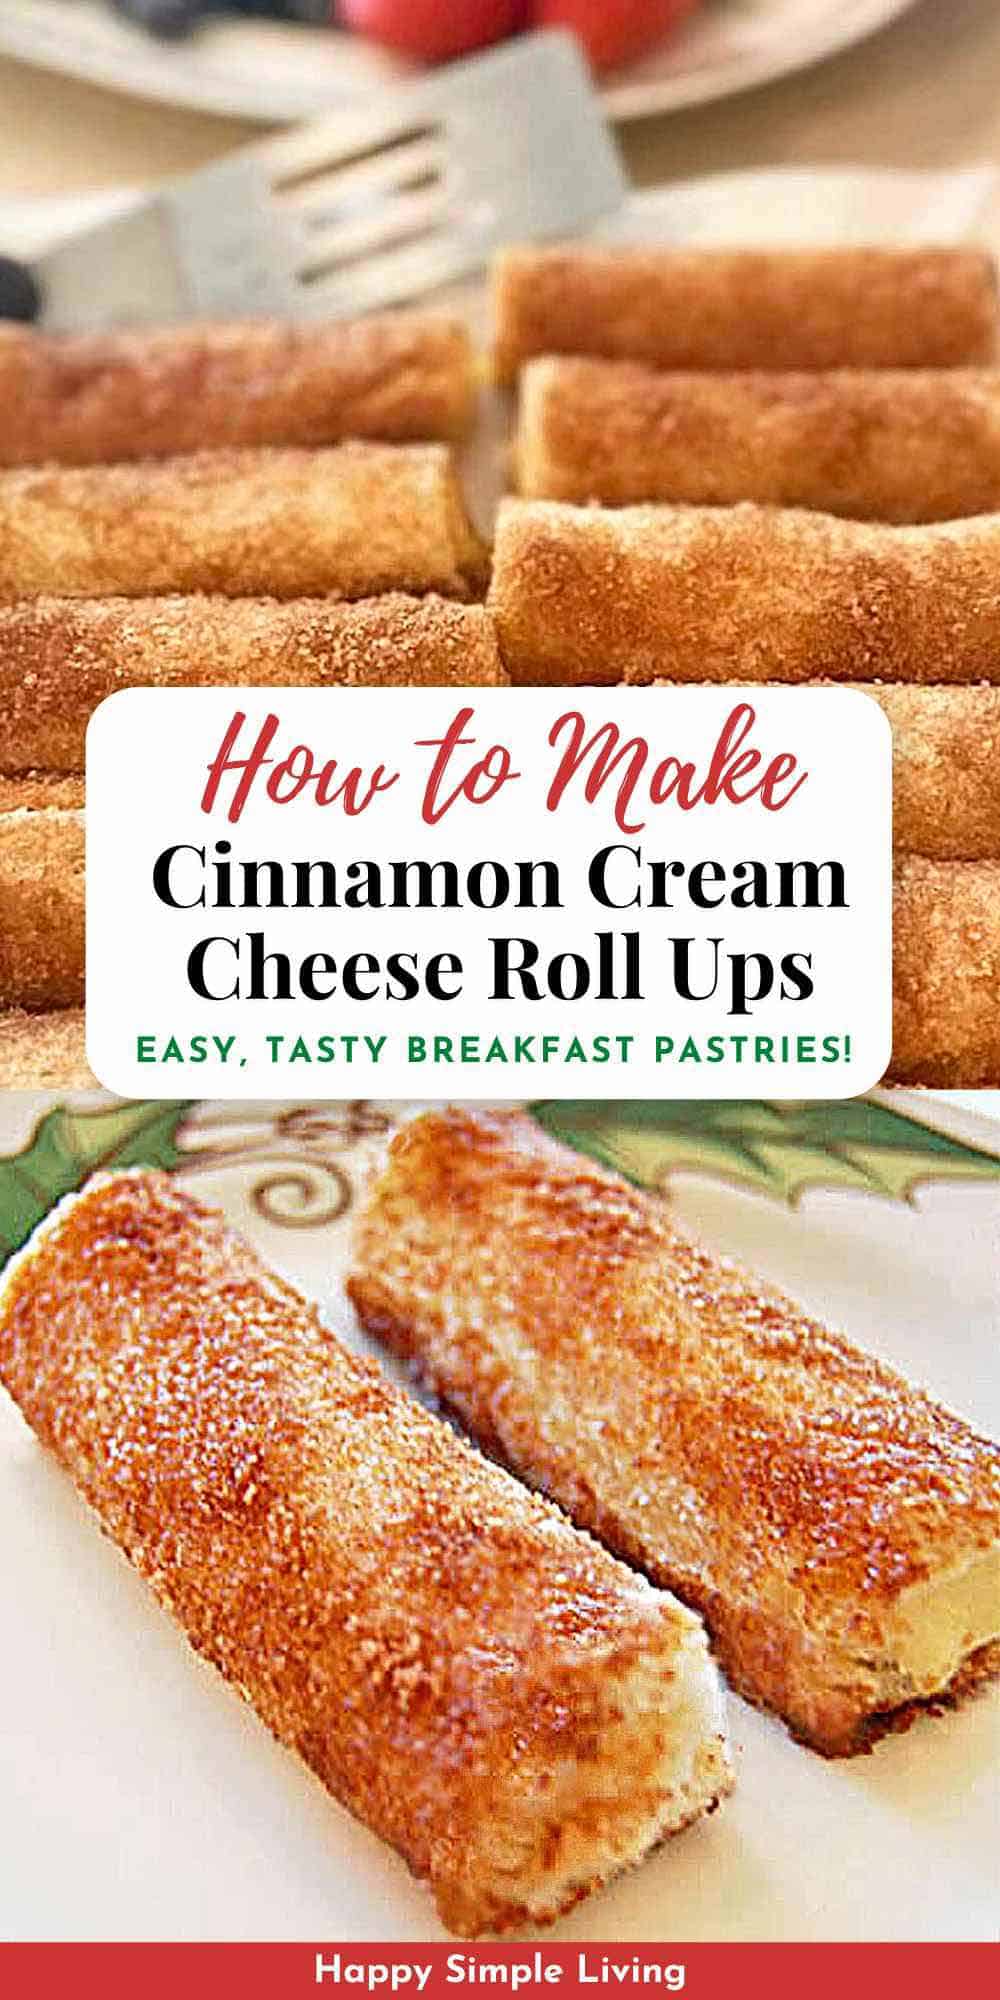 Cinnamon Cream Cheese Roll Ups shown on a serving platter and as an individual serving on a plate.